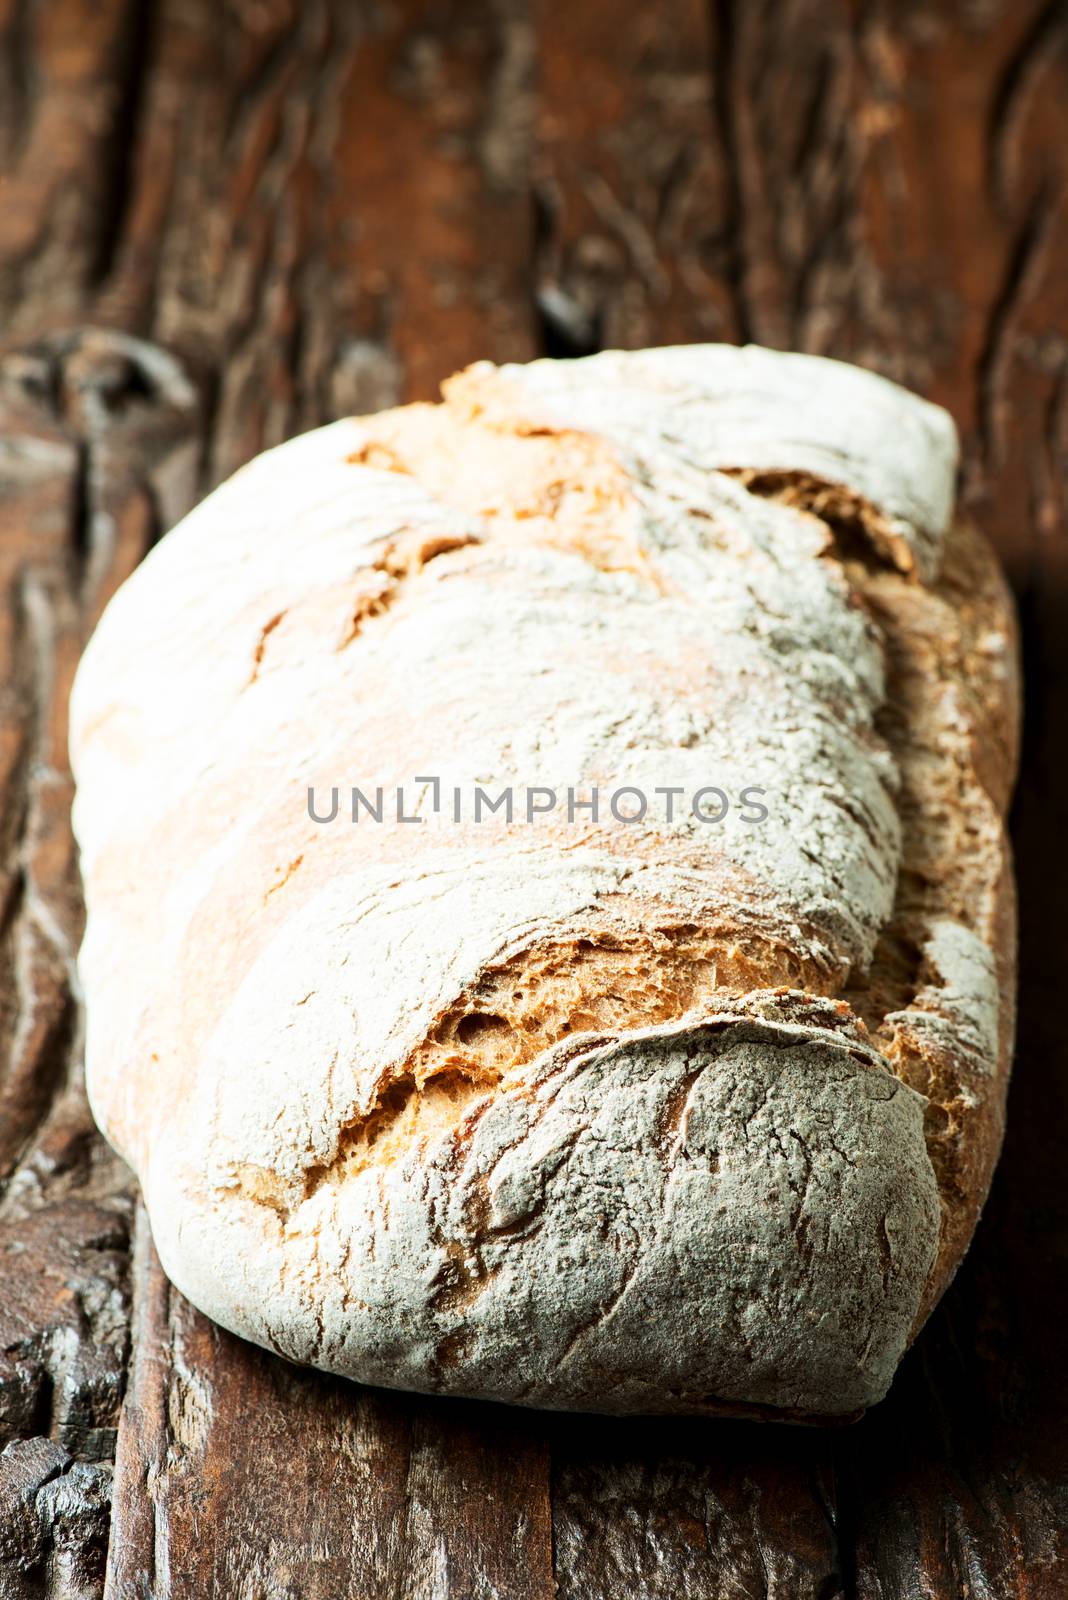 Large loaf of bread homemade by Nanisimova